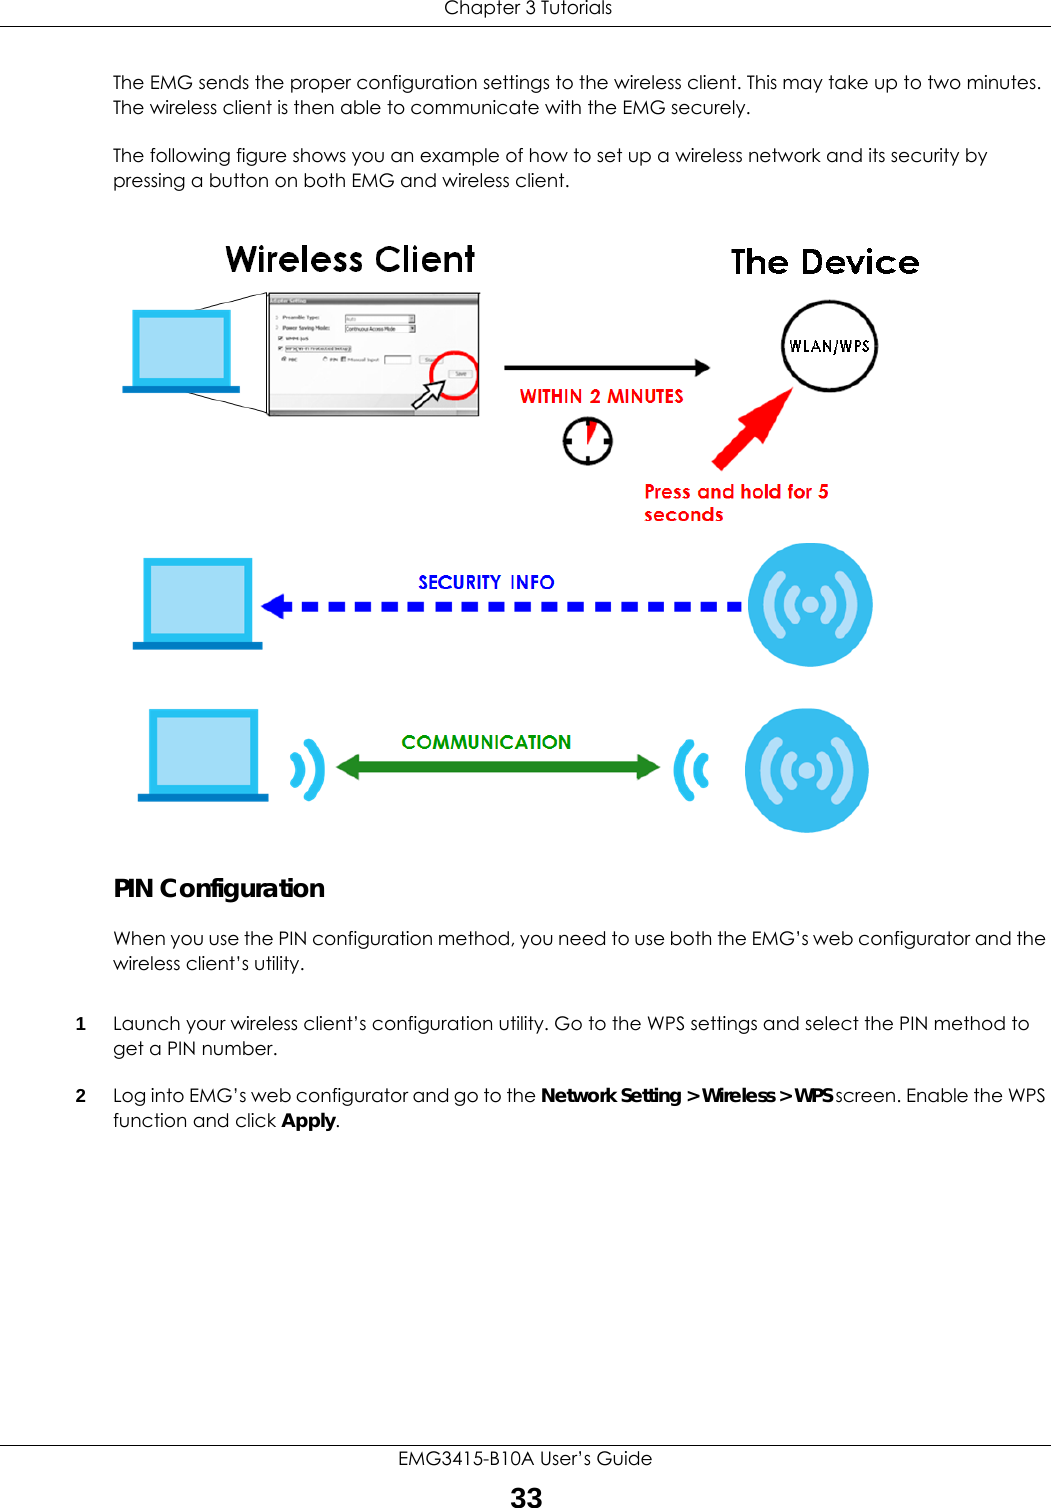  Chapter 3 TutorialsEMG3415-B10A User’s Guide33The EMG sends the proper configuration settings to the wireless client. This may take up to two minutes. The wireless client is then able to communicate with the EMG securely.The following figure shows you an example of how to set up a wireless network and its security by pressing a button on both EMG and wireless client.Example WPS Process: PBC MethodZyxelPIN ConfigurationWhen you use the PIN configuration method, you need to use both the EMG’s web configurator and the wireless client’s utility.1Launch your wireless client’s configuration utility. Go to the WPS settings and select the PIN method to get a PIN number.   2Log into EMG’s web configurator and go to the Network Setting &gt; Wireless &gt; WPS screen. Enable the WPS function and click Apply. 